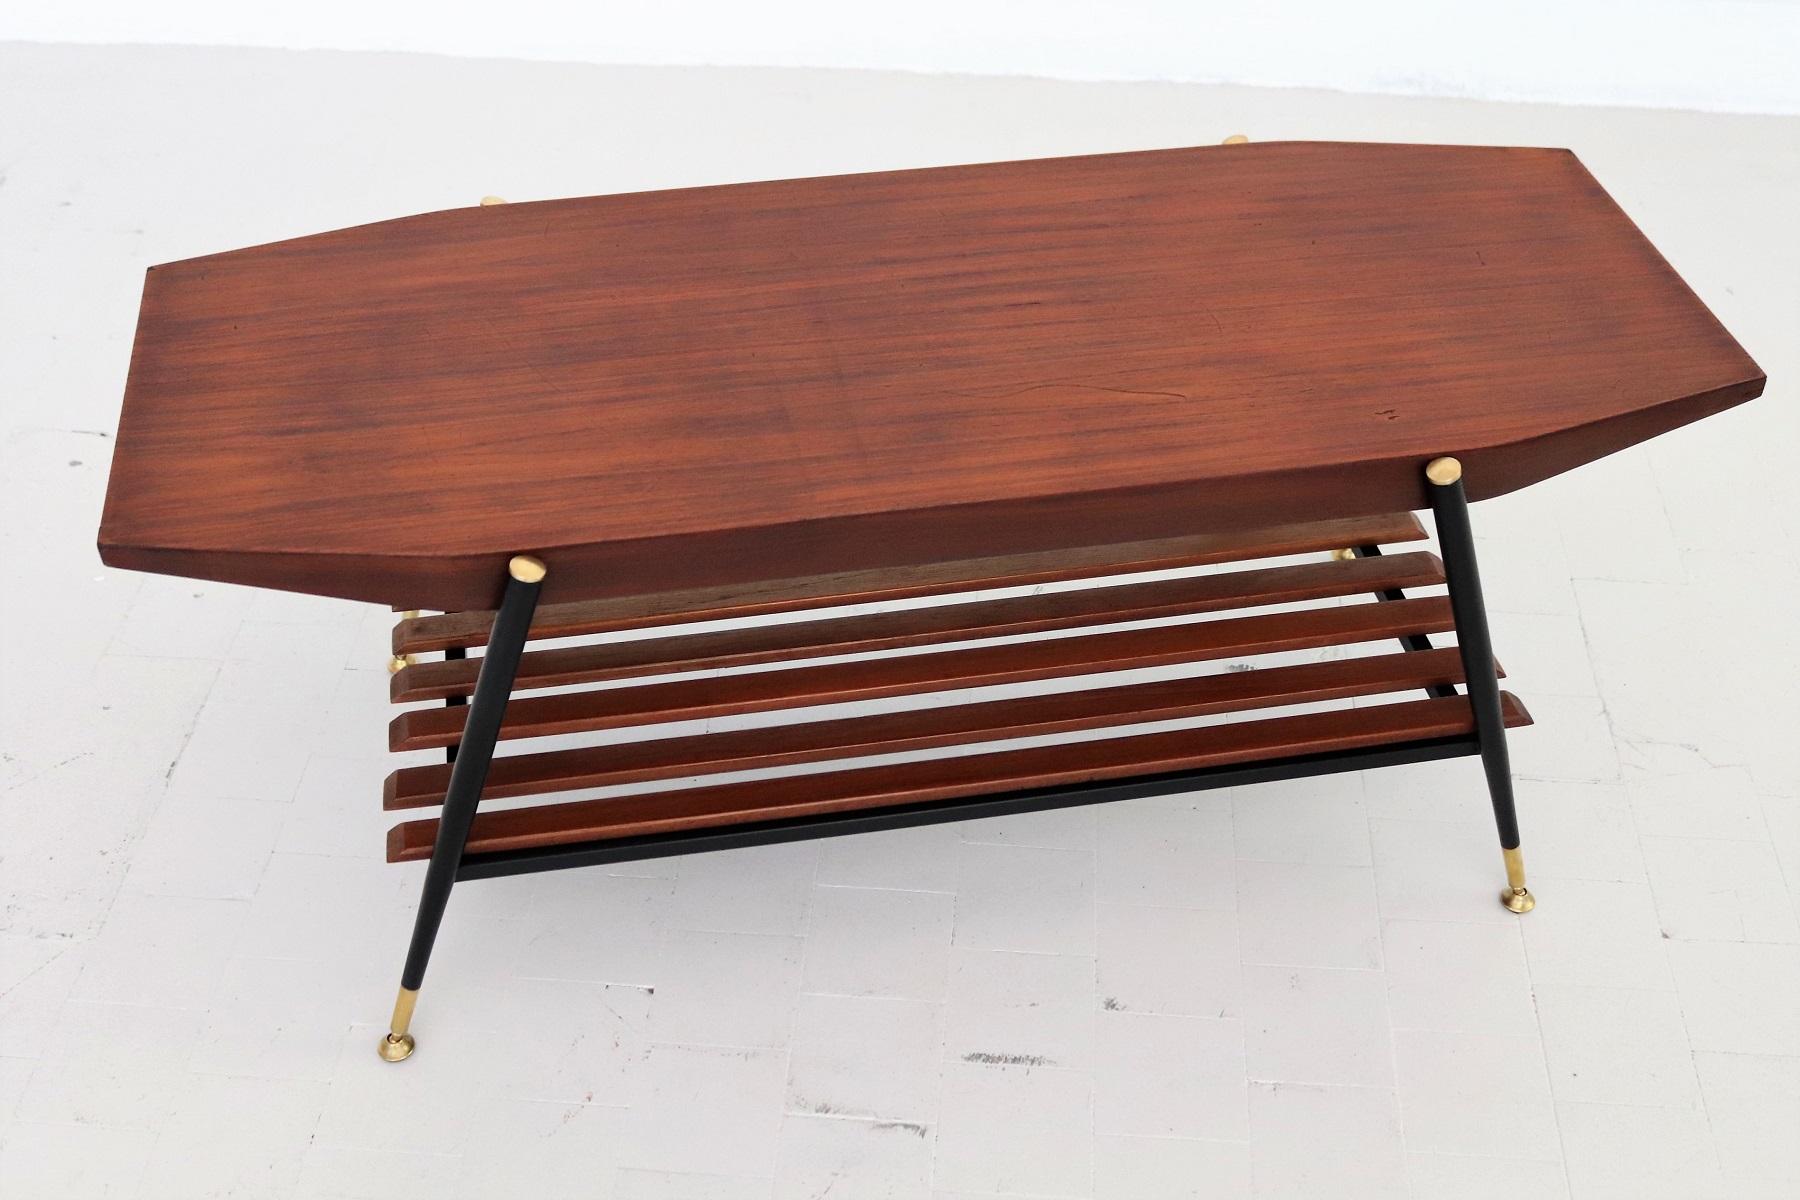 Italian Midcentury Octagonal Coffee Table in Mahogany Veneer with Brass Details For Sale 10